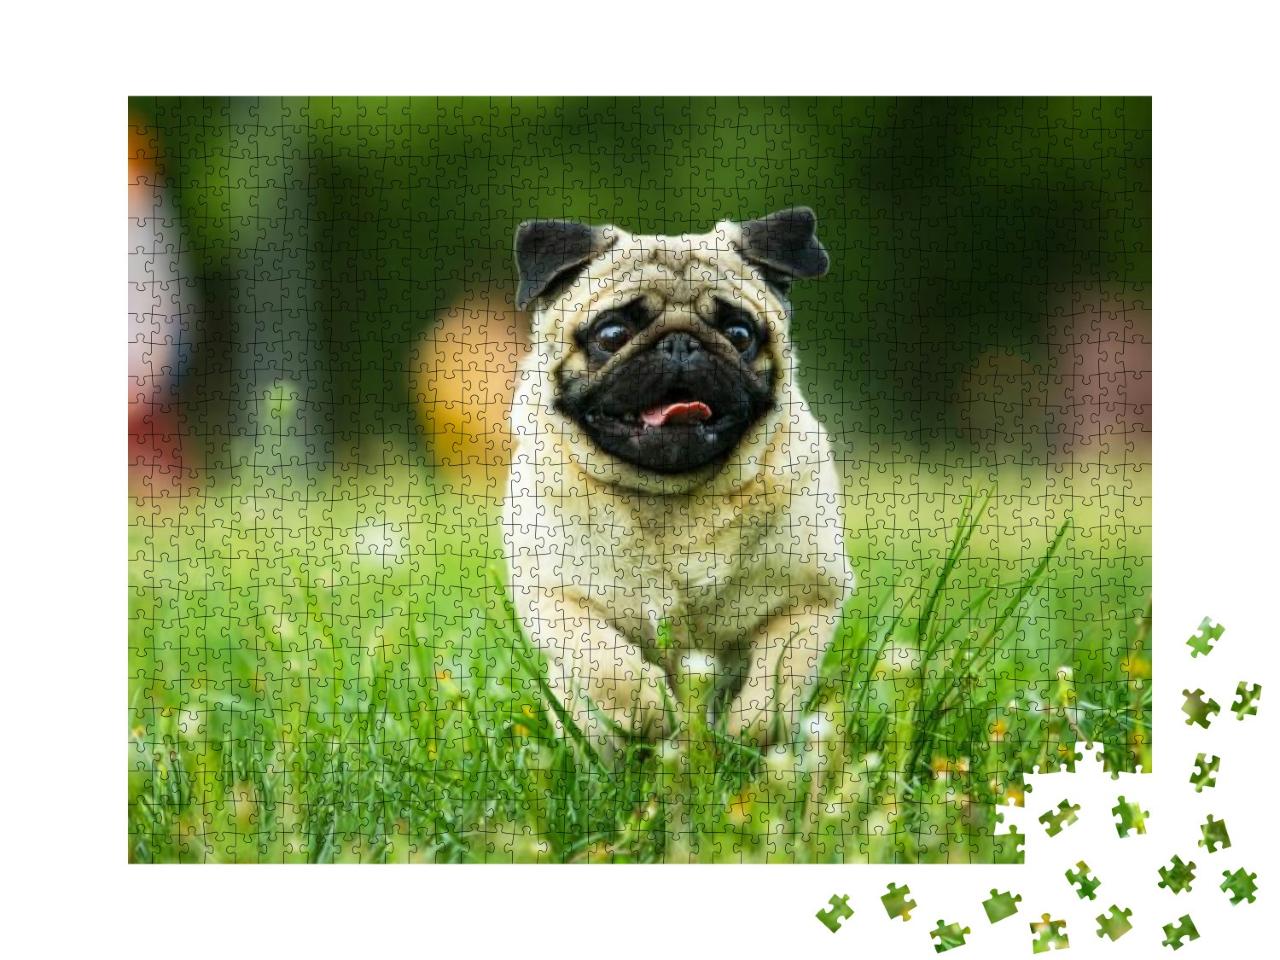 Dog, Pug, Animal, Puppy, Pet, Canine, Cute, Breed, Bulldo... Jigsaw Puzzle with 1000 pieces